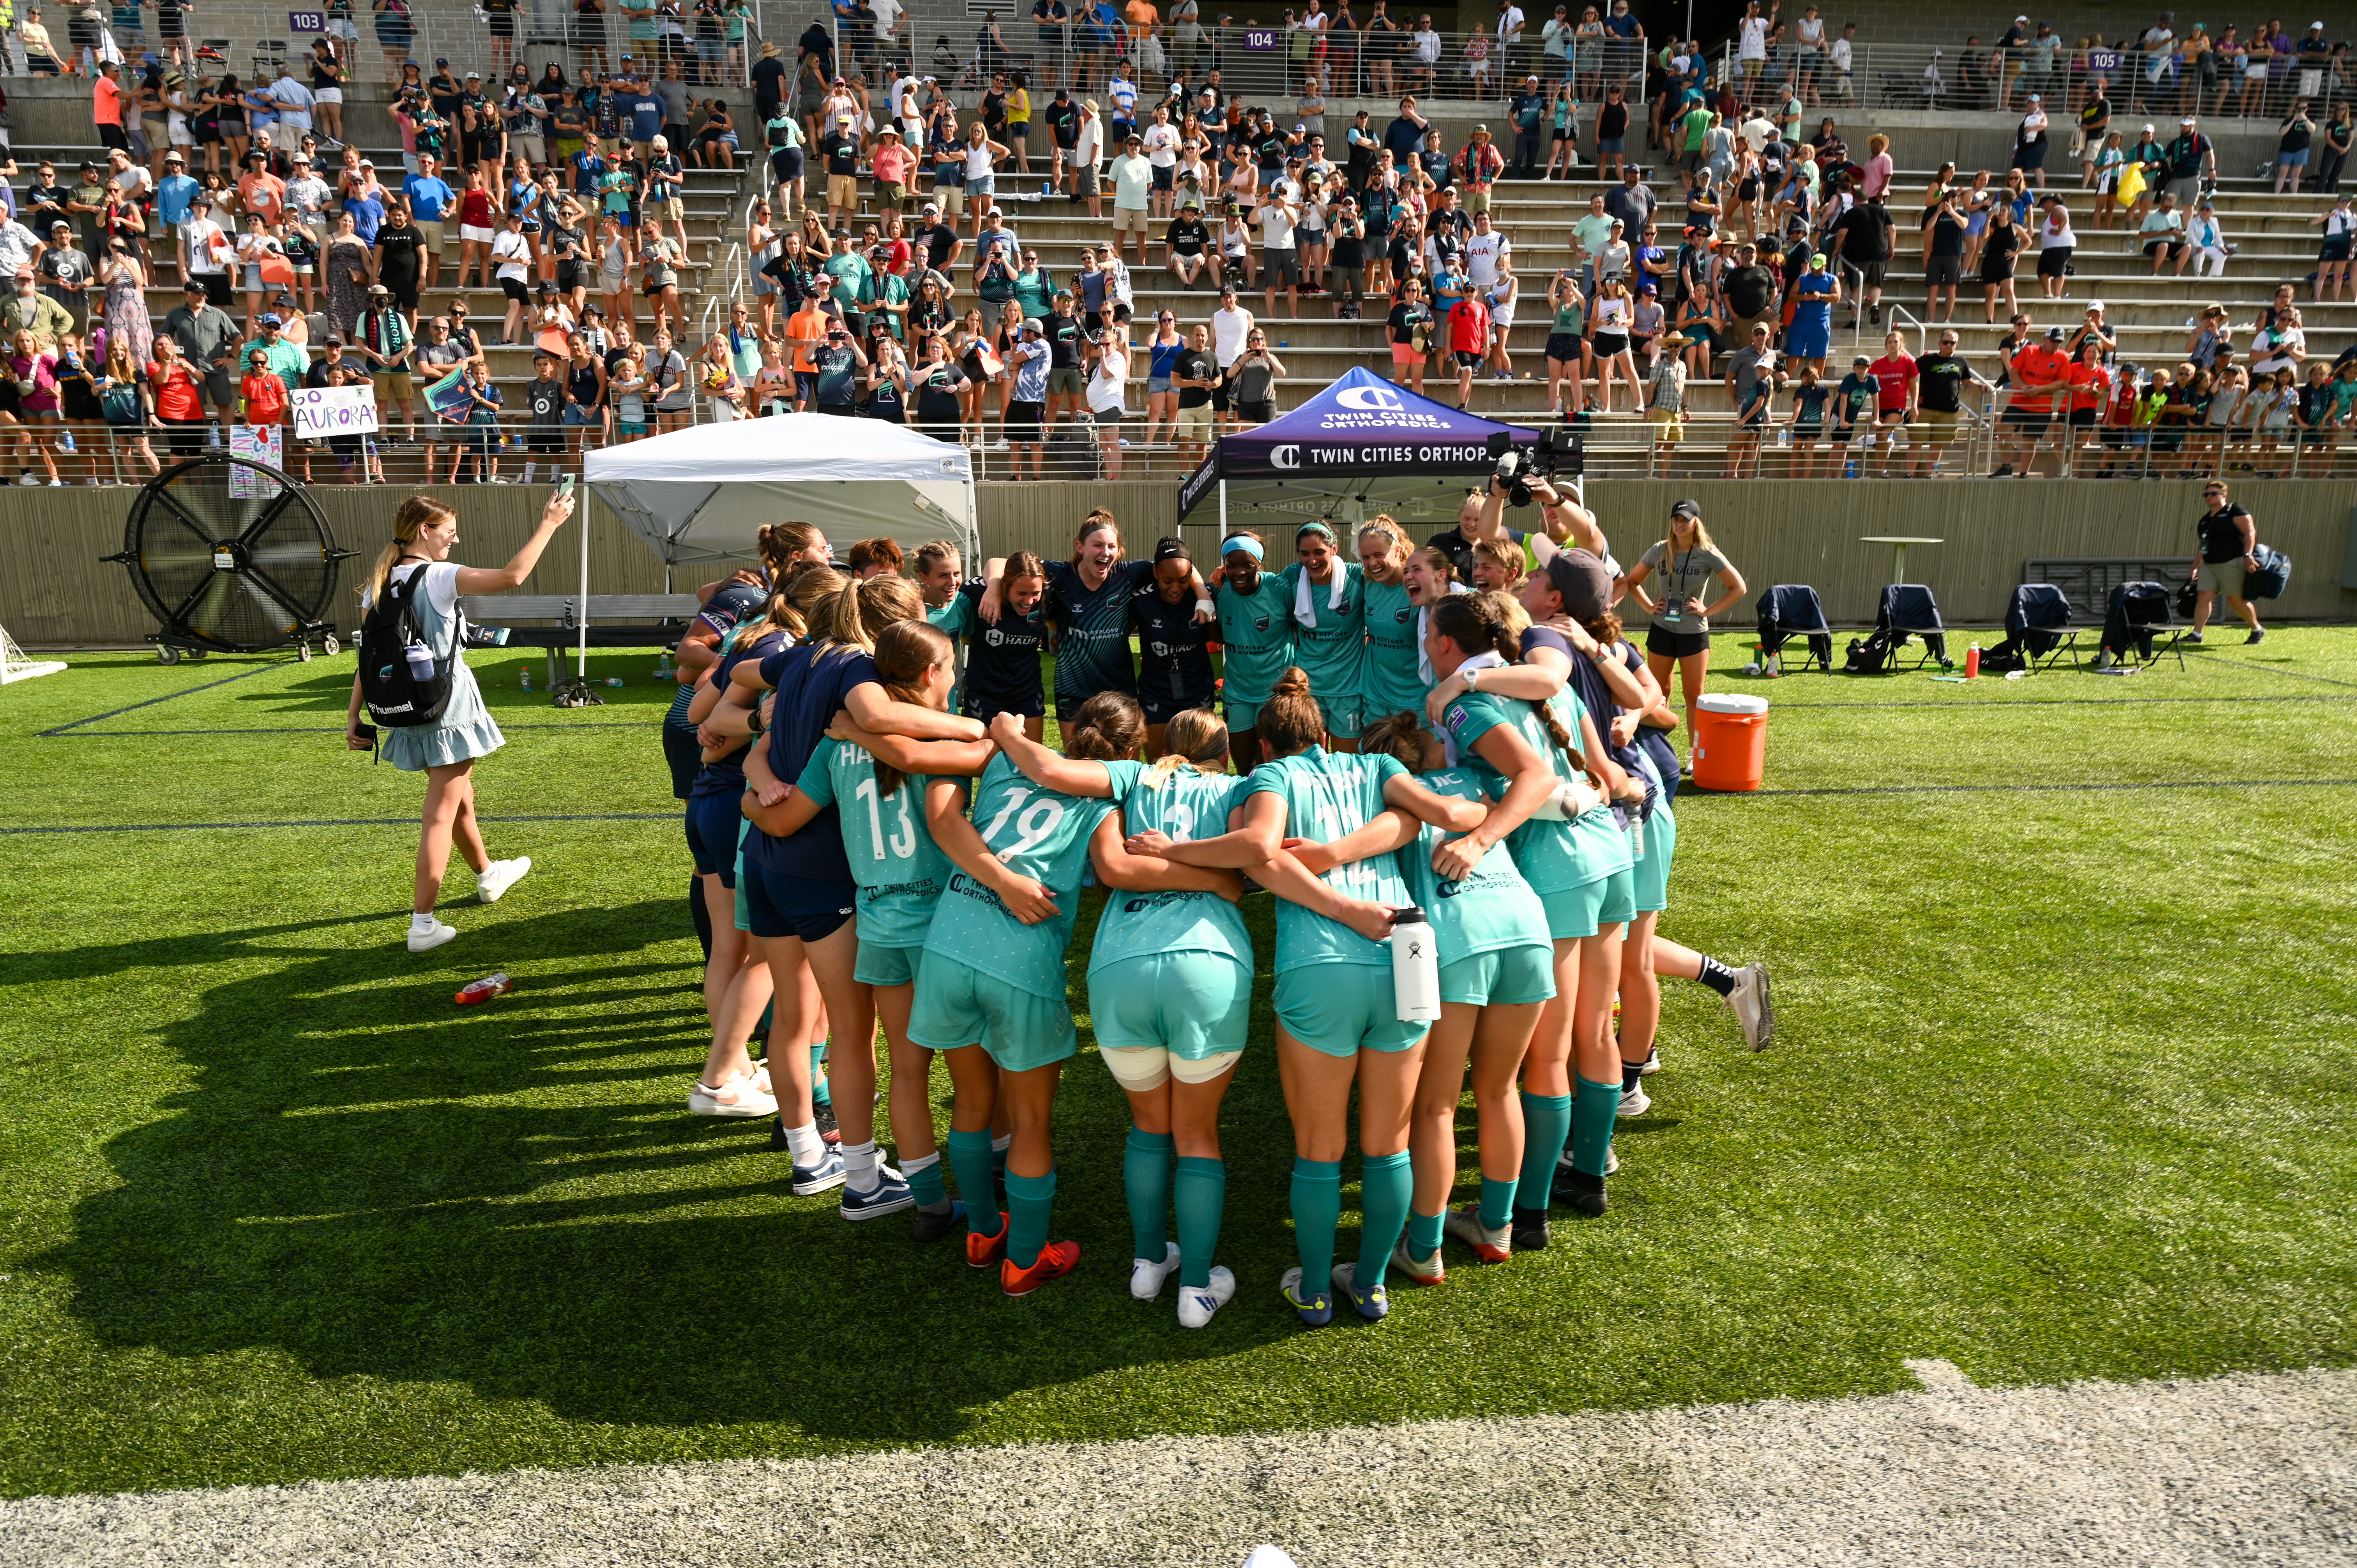 Players dressed in Minnesota Aurora FC’s turquoise jerseys in a huddle during a game in front of spectators in the stadium